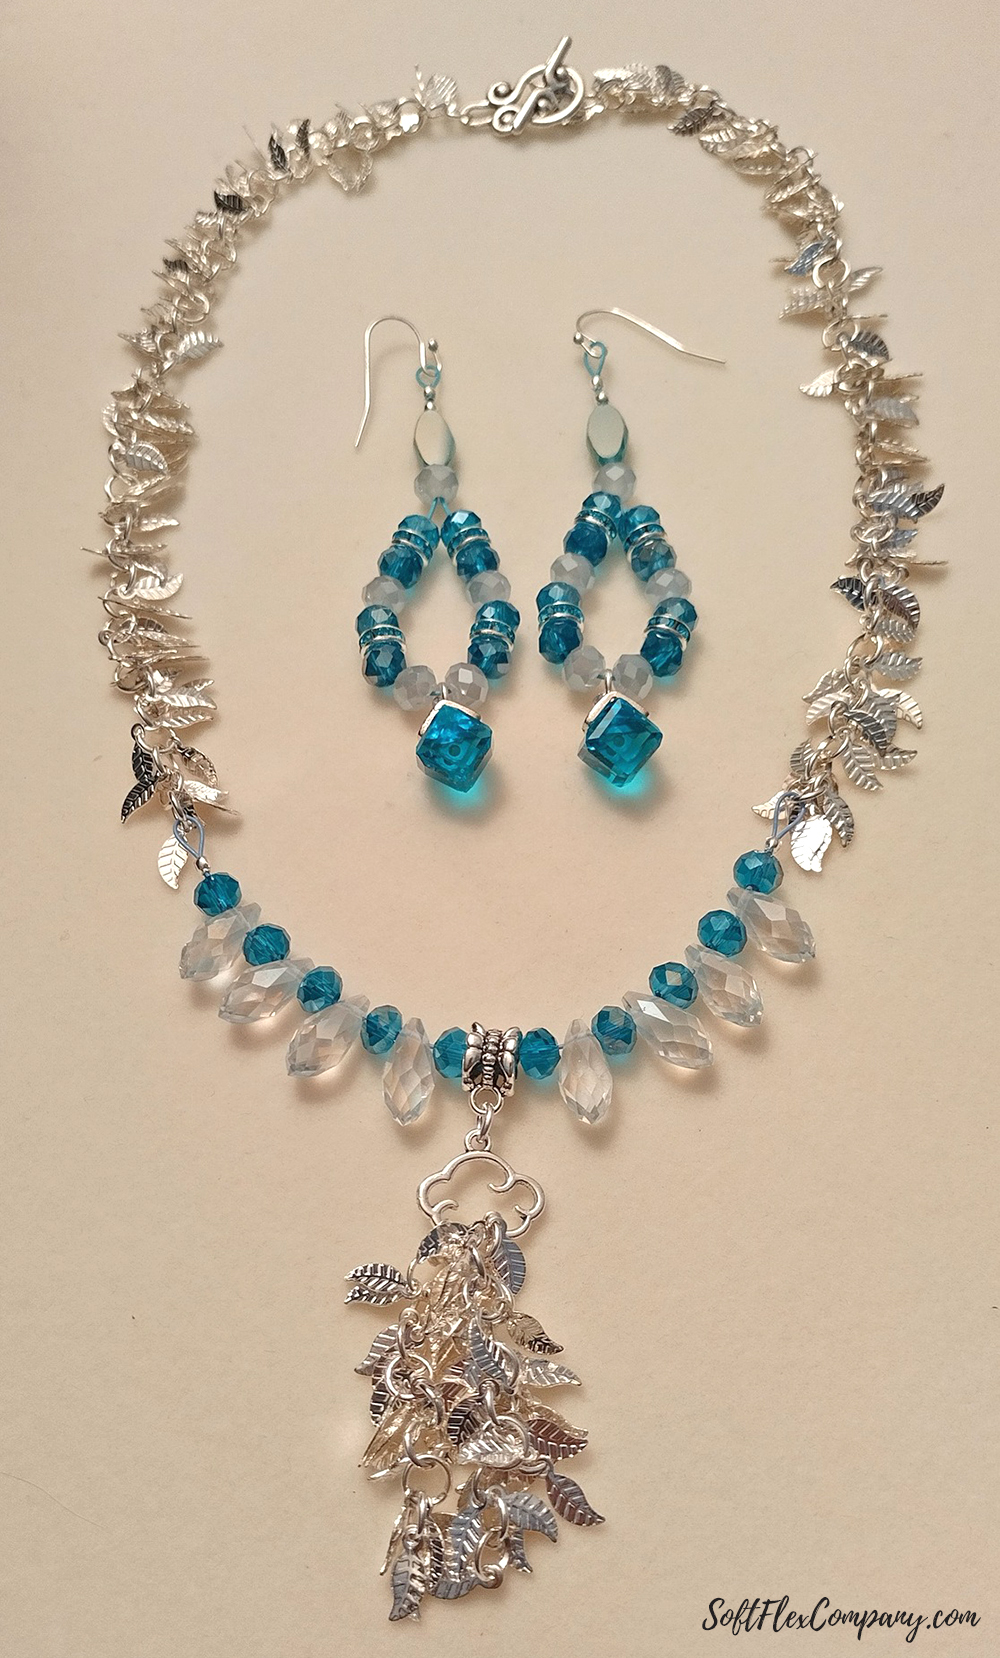 Rainy Day Blues Jewelry Design by Gale Loder